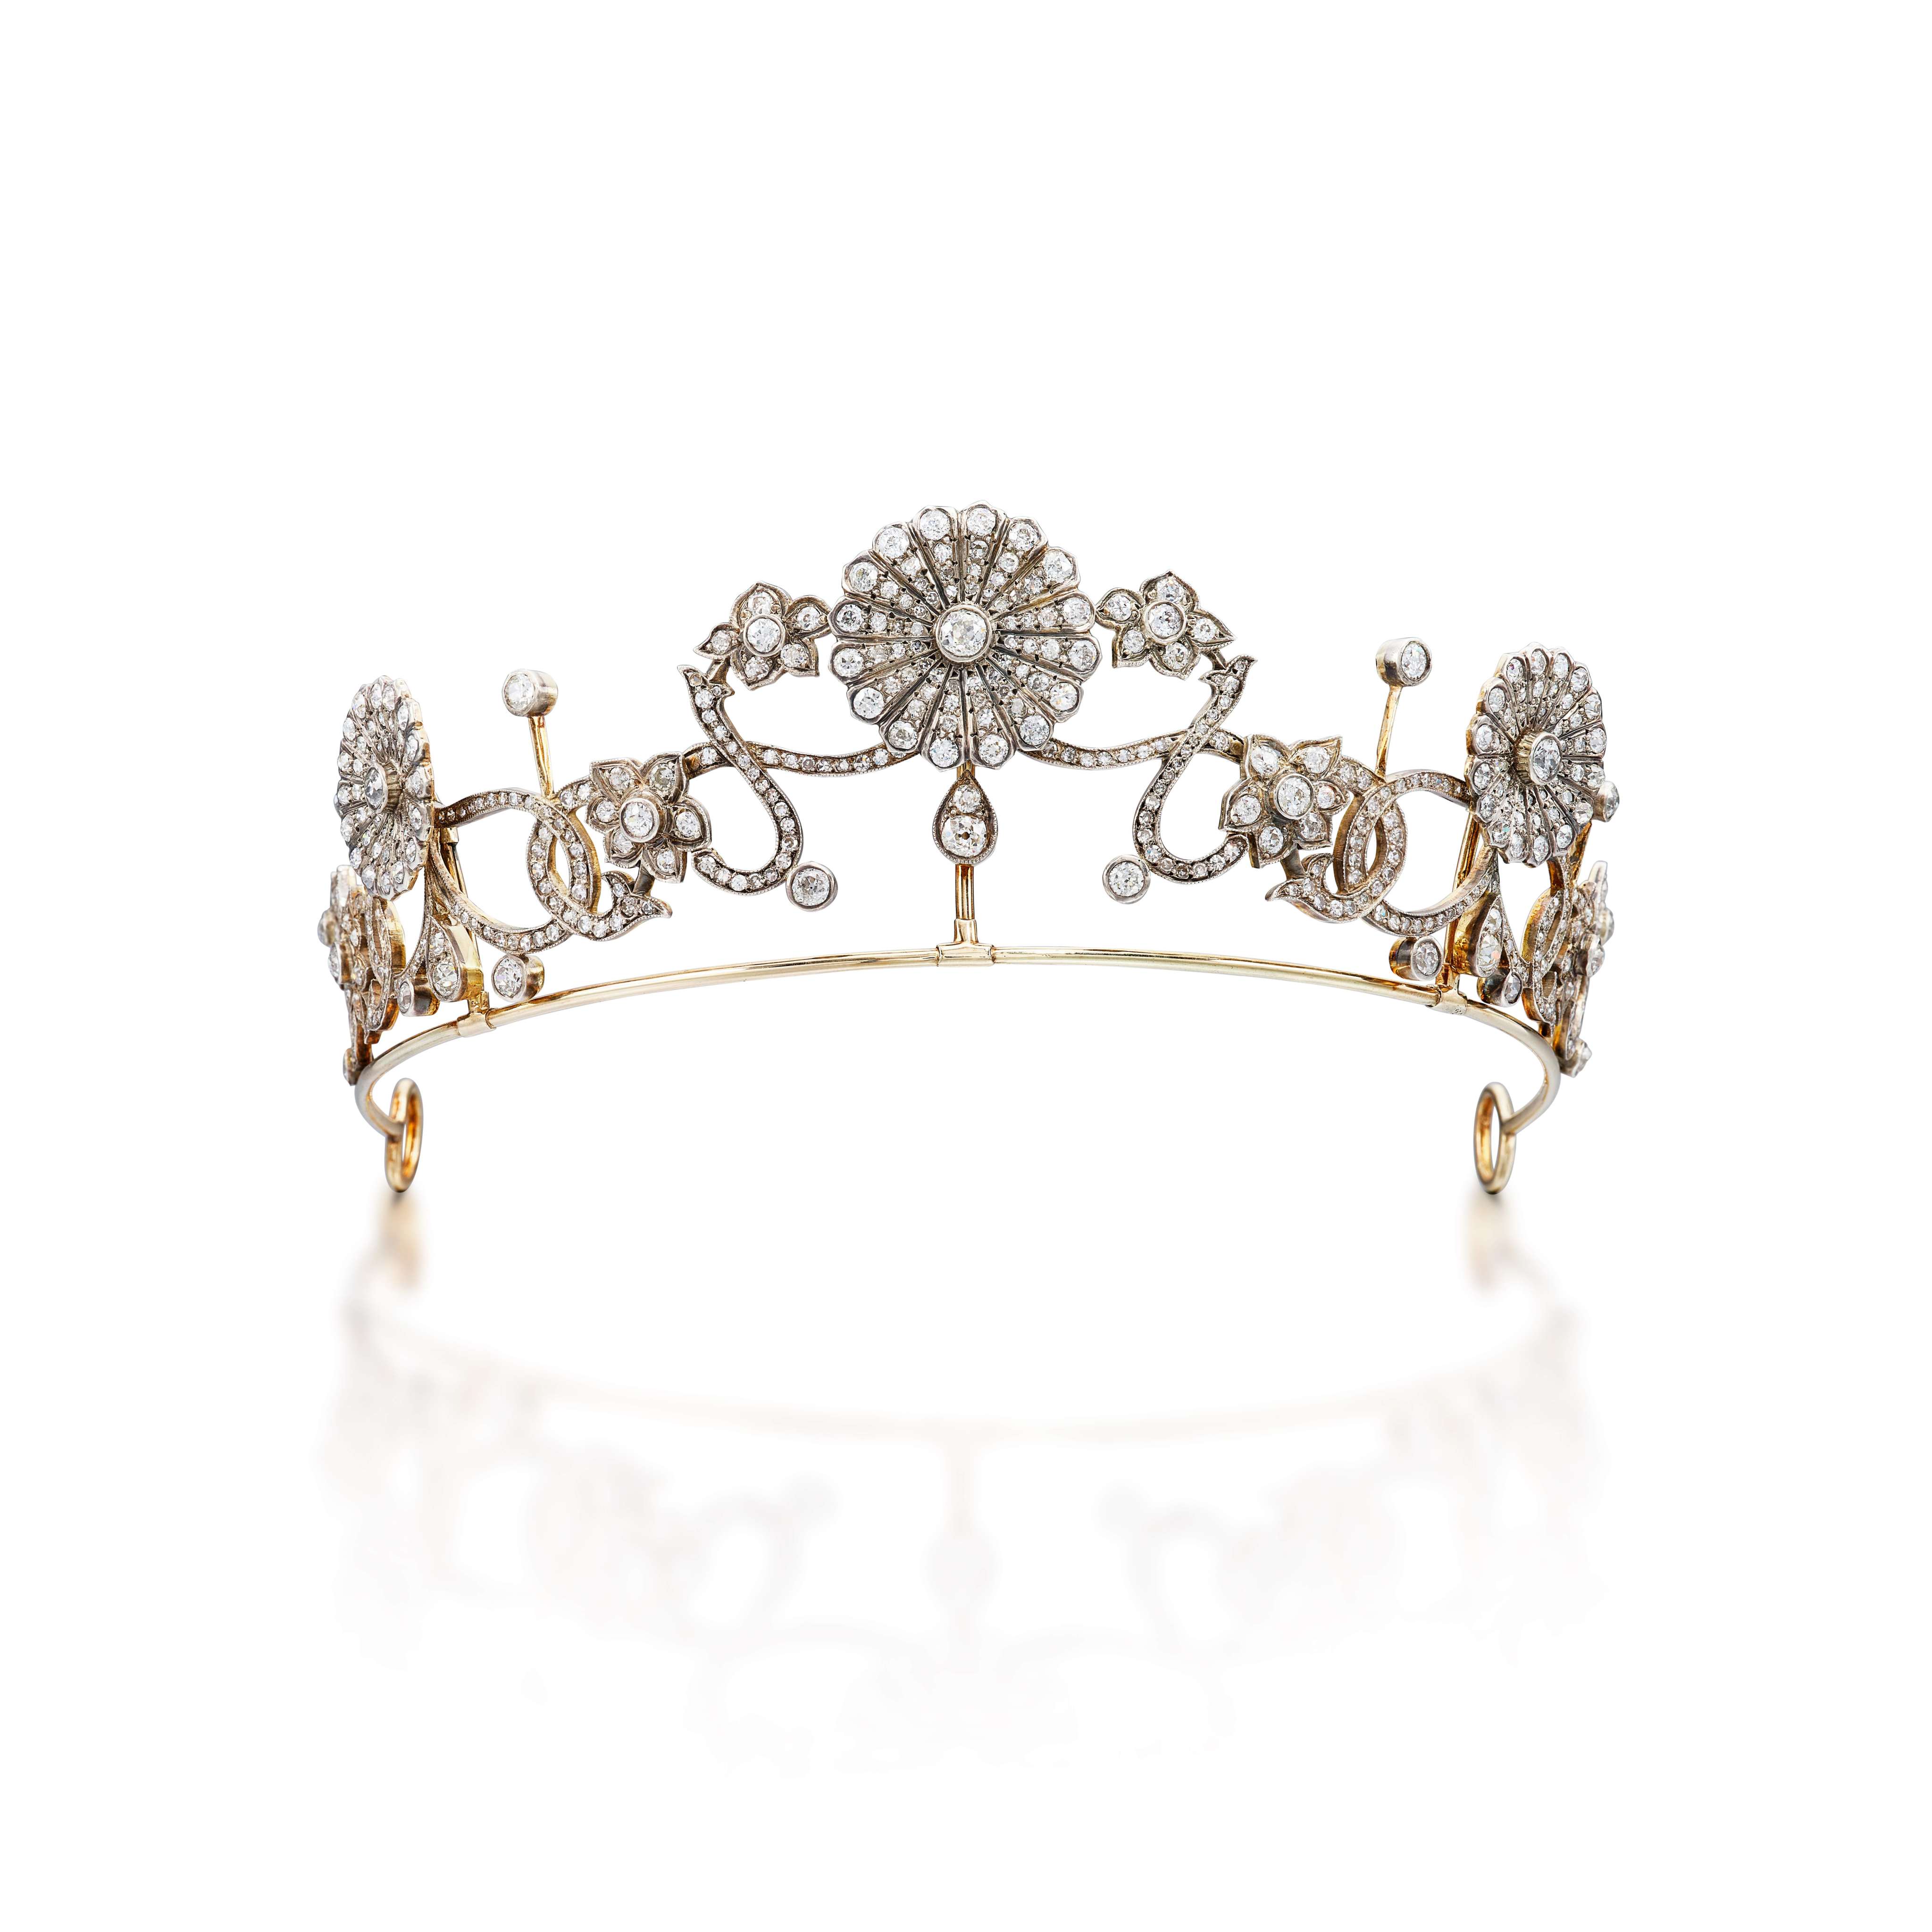 Up for auction in July, this floral tiara is an example of the style favoured by royals around the world but more modern interpretations have recently been rocking award-season red carpets. Photo: Sotheby’s